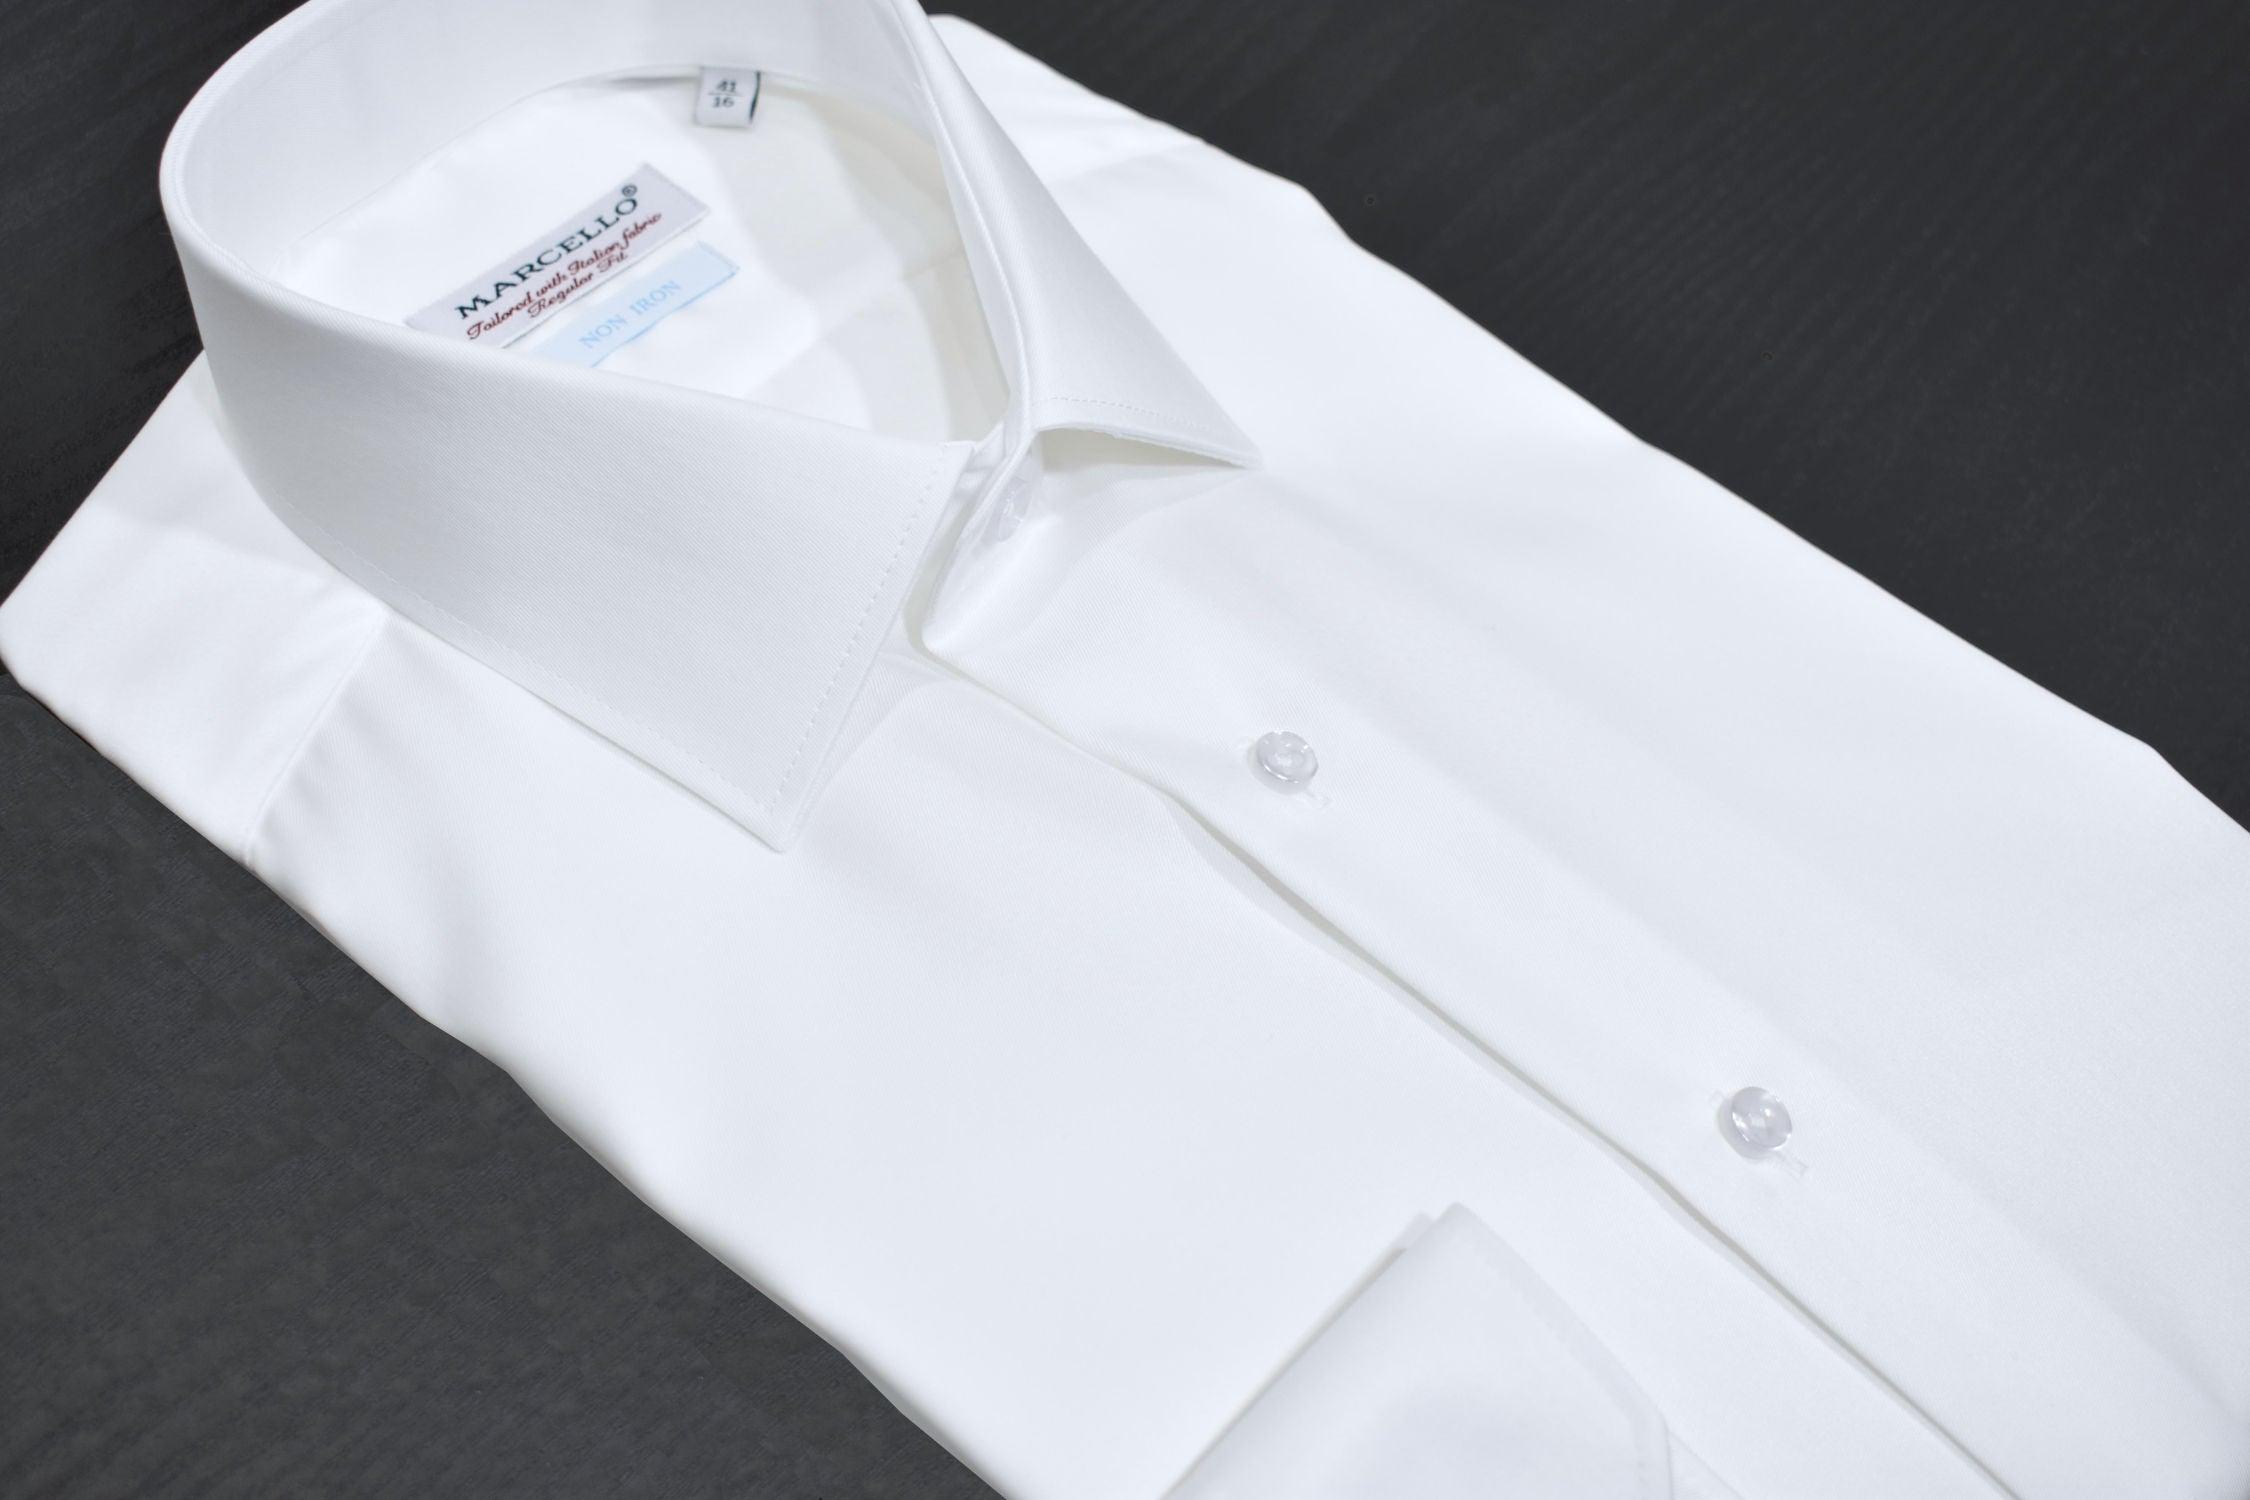 Beautiful fine twill fabric with an easy care finish to help you look your best. The fine fabric has a lightweight and richly soft hand feel that gives an elegant image. Extra fine, soft Italian cotton. Ultra fine diagonal twill textured fabric. Non iron enhanced treatment. Classic fit. Imported, Turkey. Marcello Ultra Twill Dress Shirt.